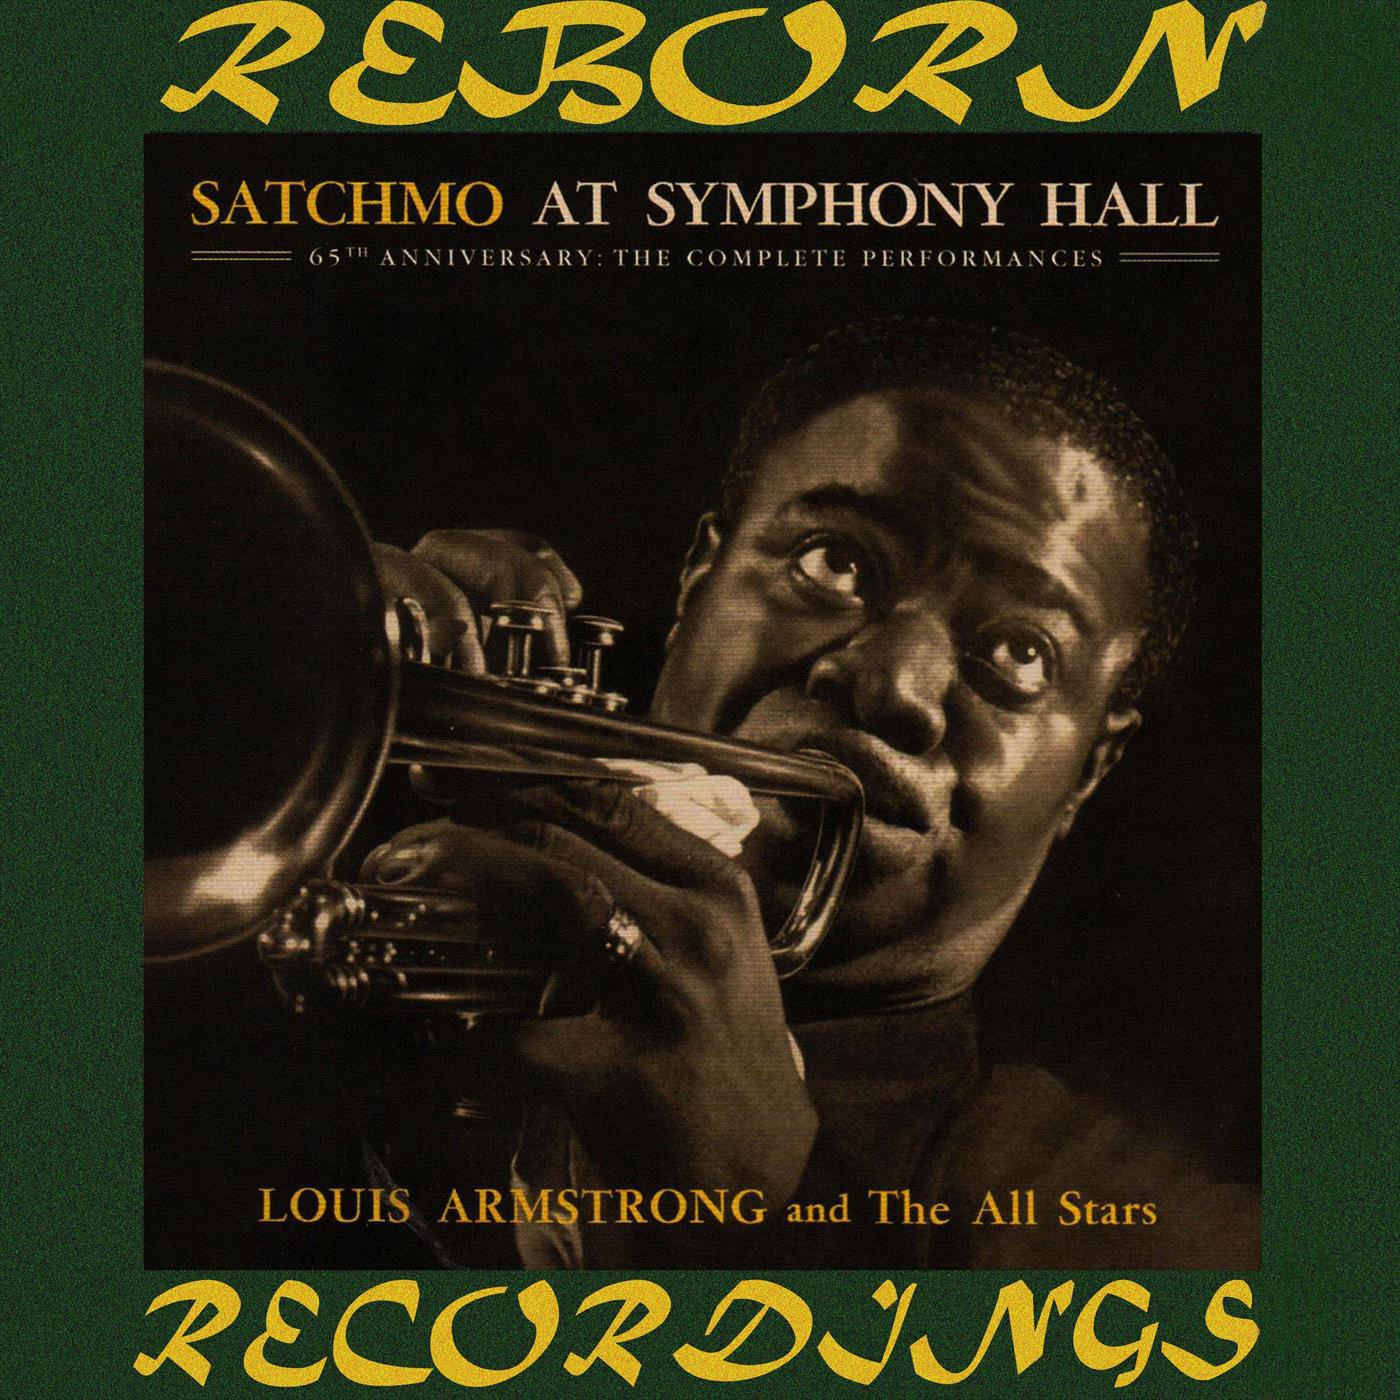 The Complete Satchmo At Symphonic Hall Performances (65th Anniversary, HD Remastered)专辑